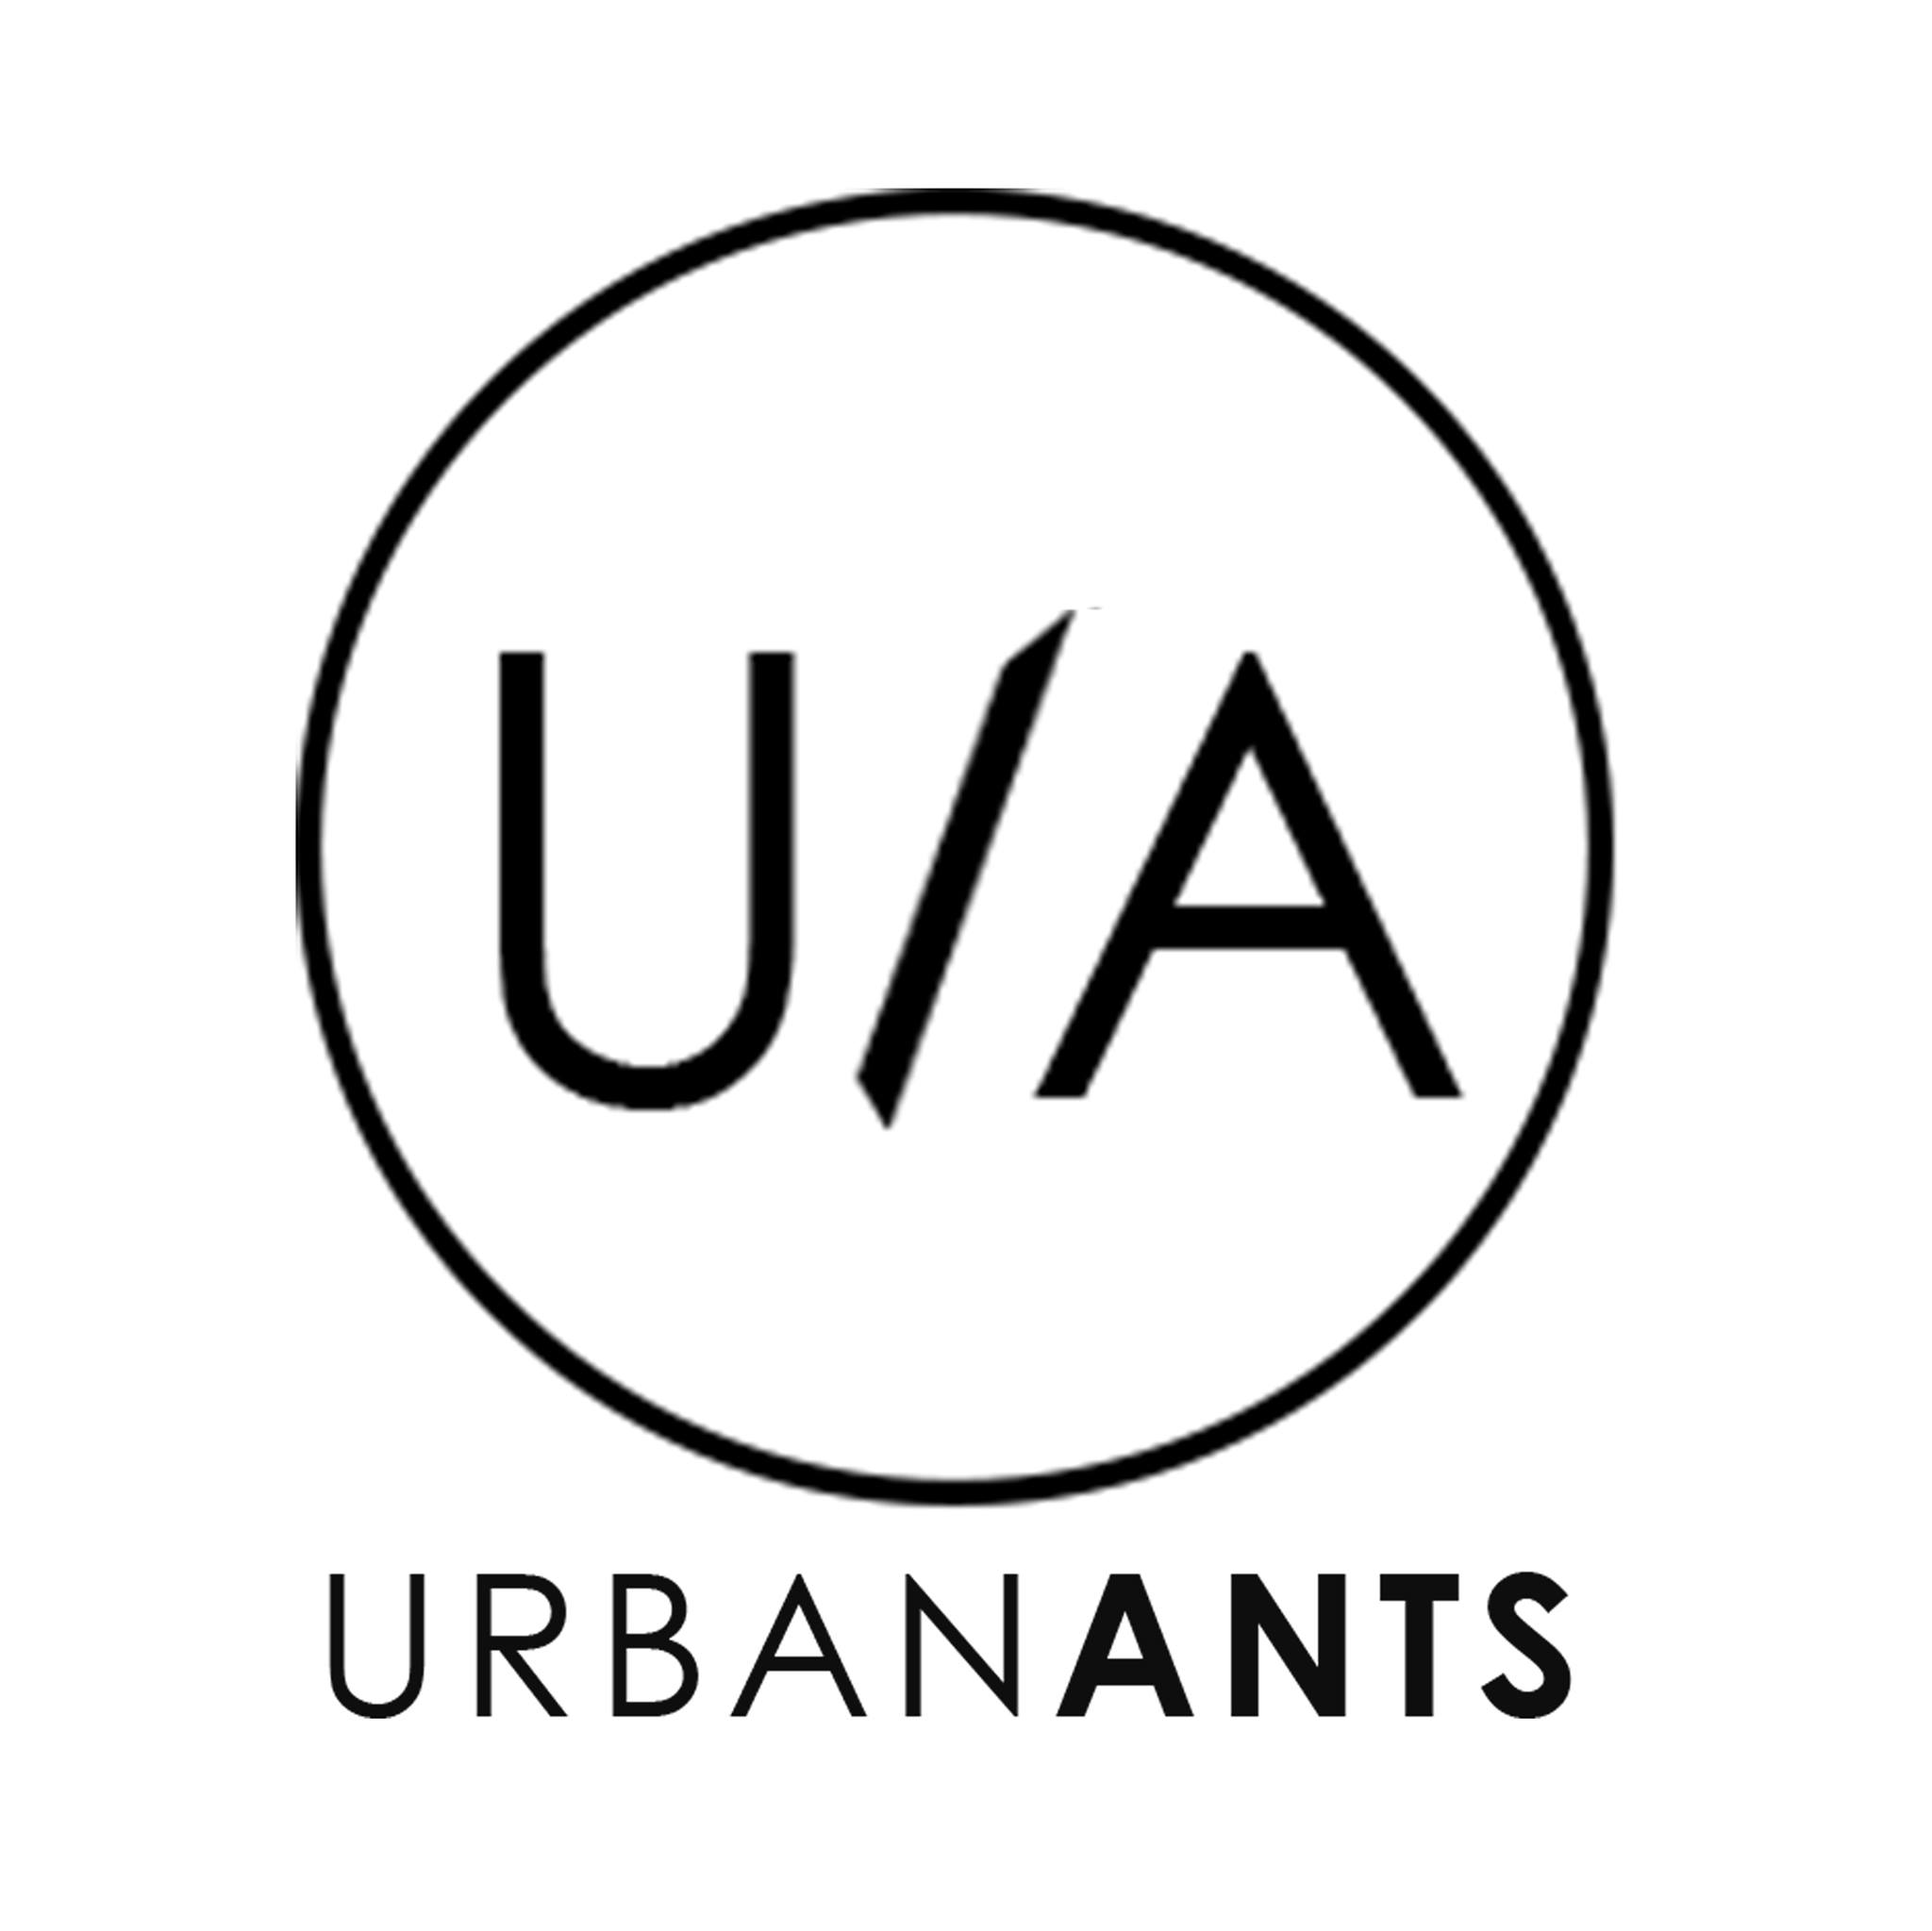 URBANANTS|IT Services|Professional Services